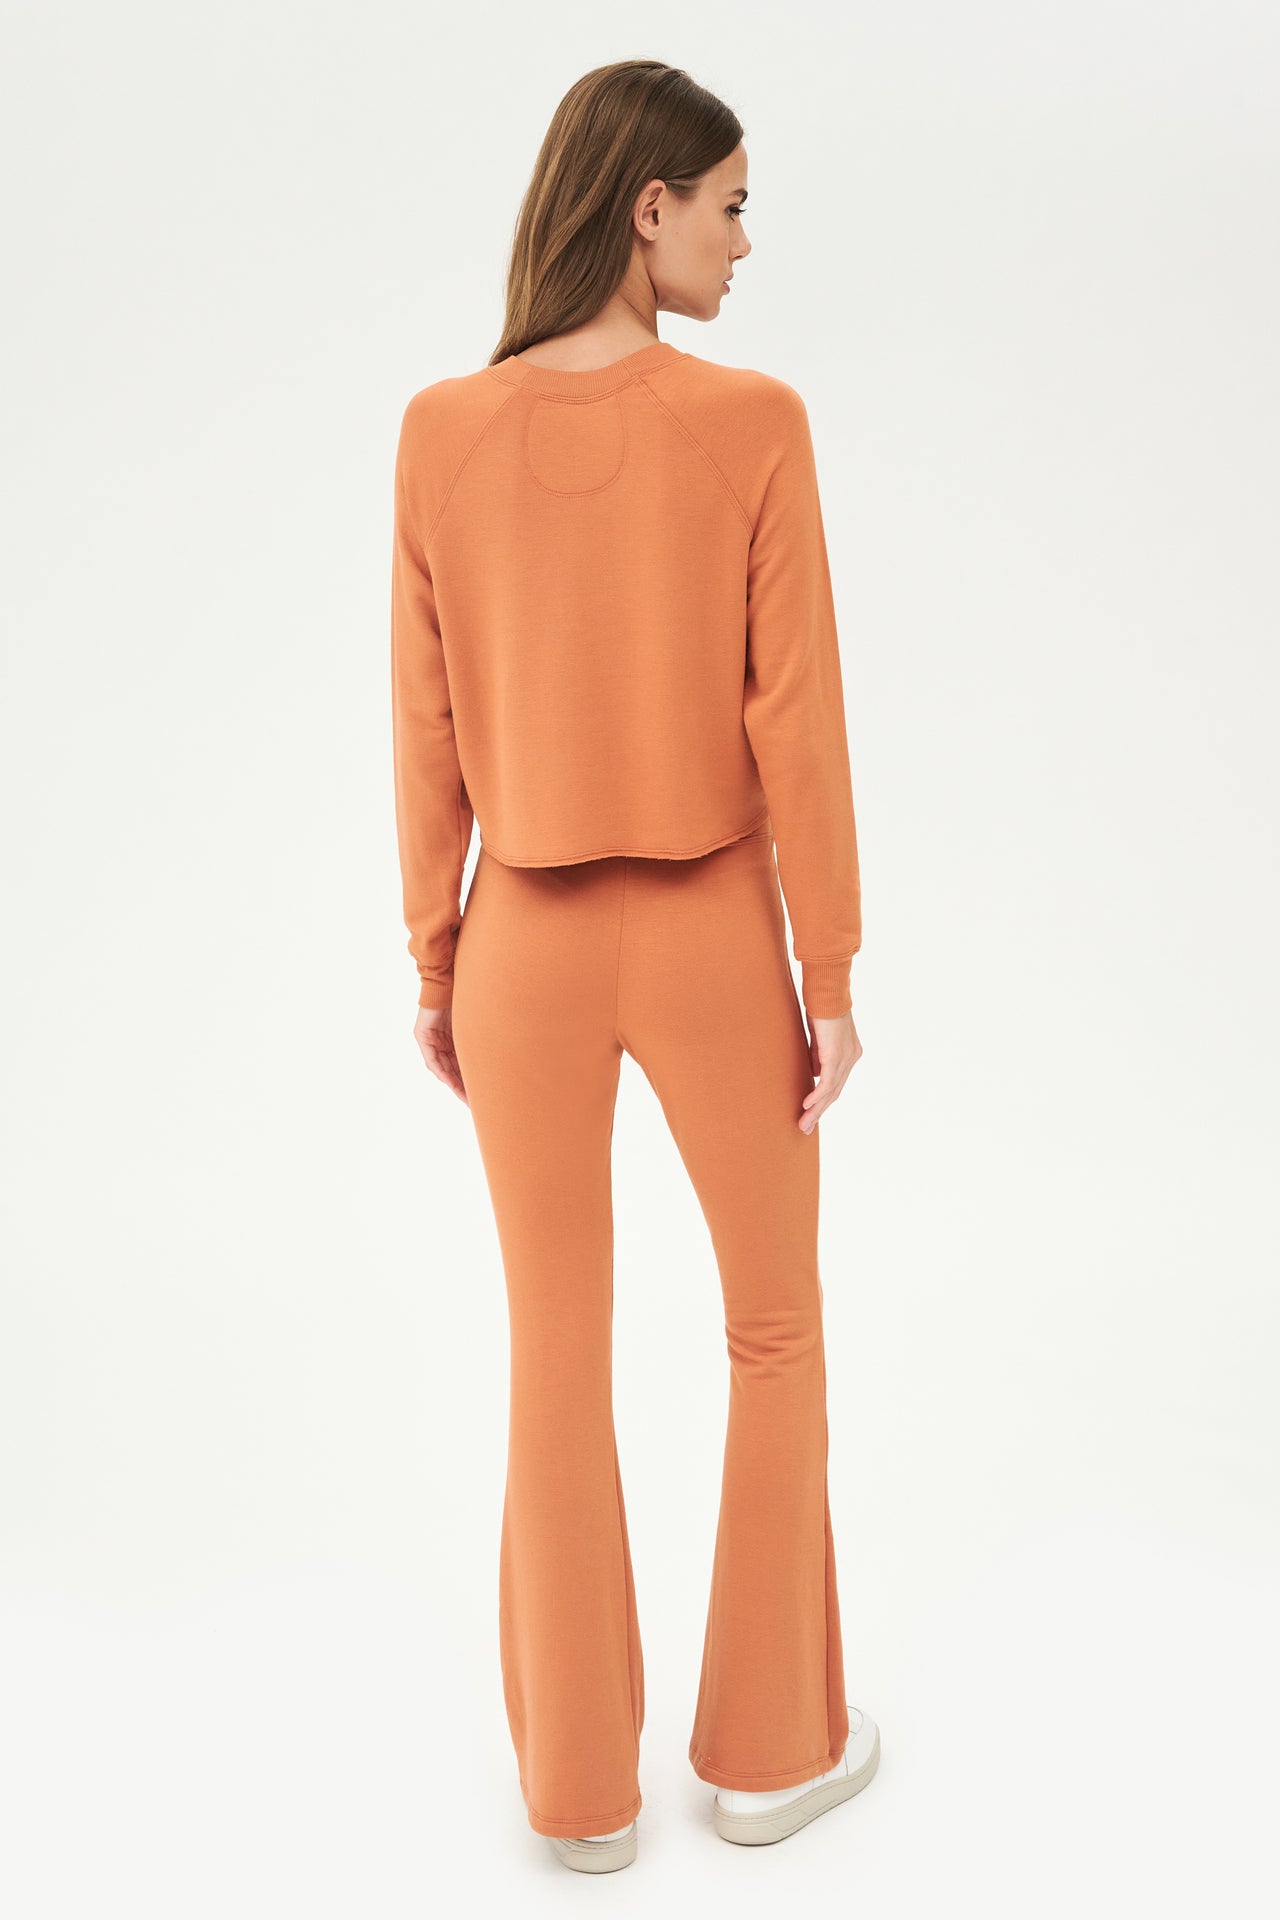 The back view of a woman wearing an orange, comfy casual chic Raquel Fleece Flare - Pecan sweatsuit and fleece flared pants by SPLITS59.